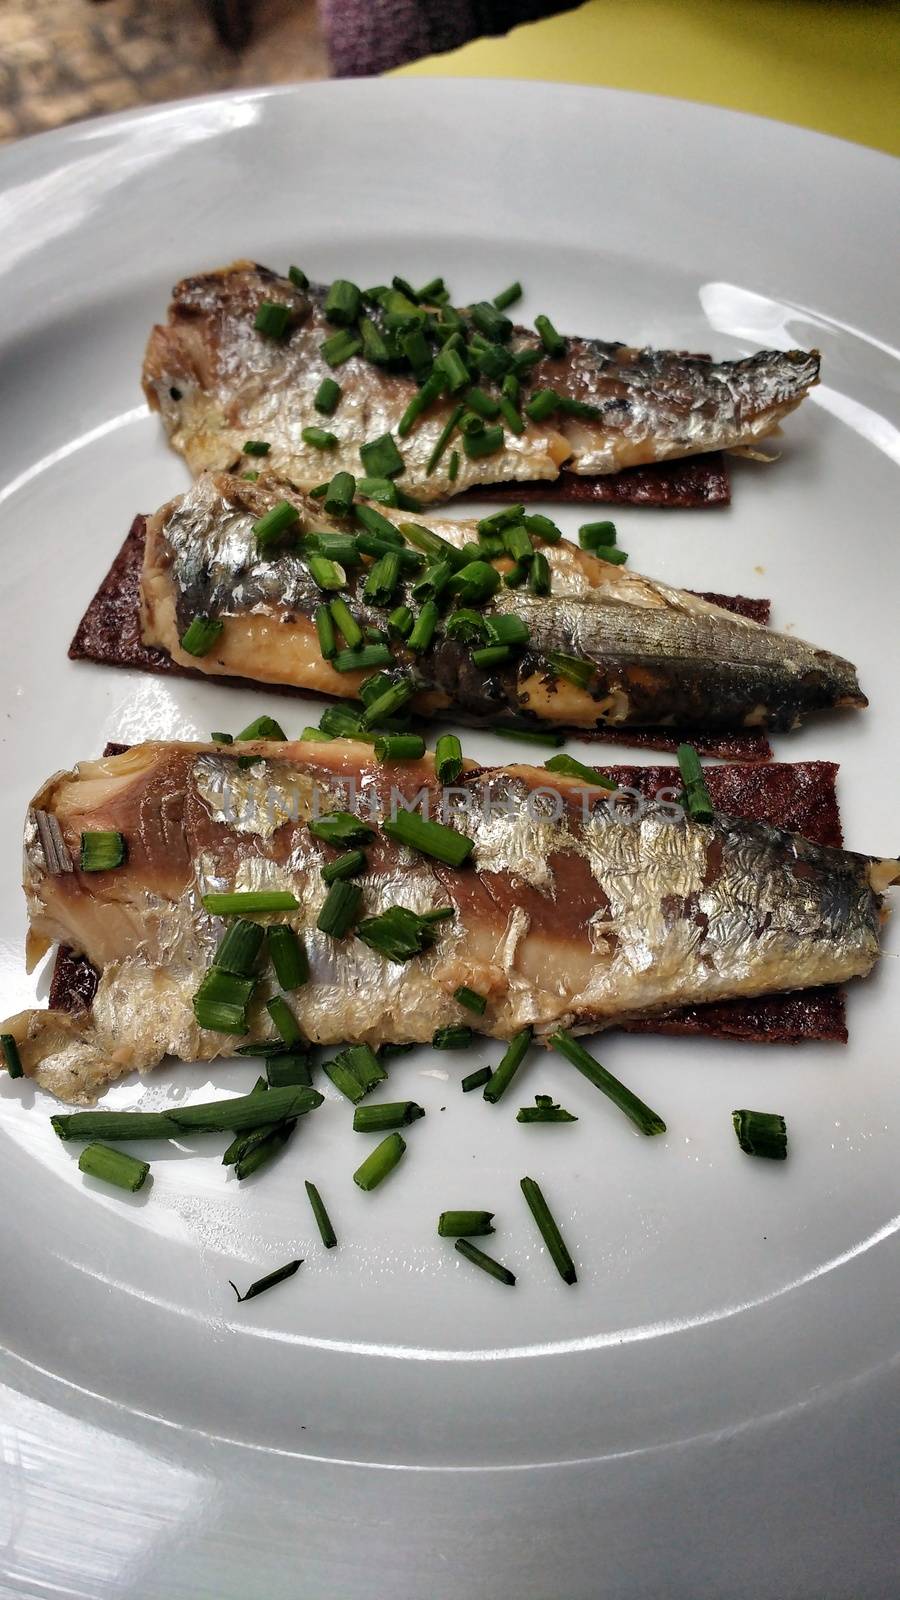 Tasty sardines flavored with chives on a plate in Portugal